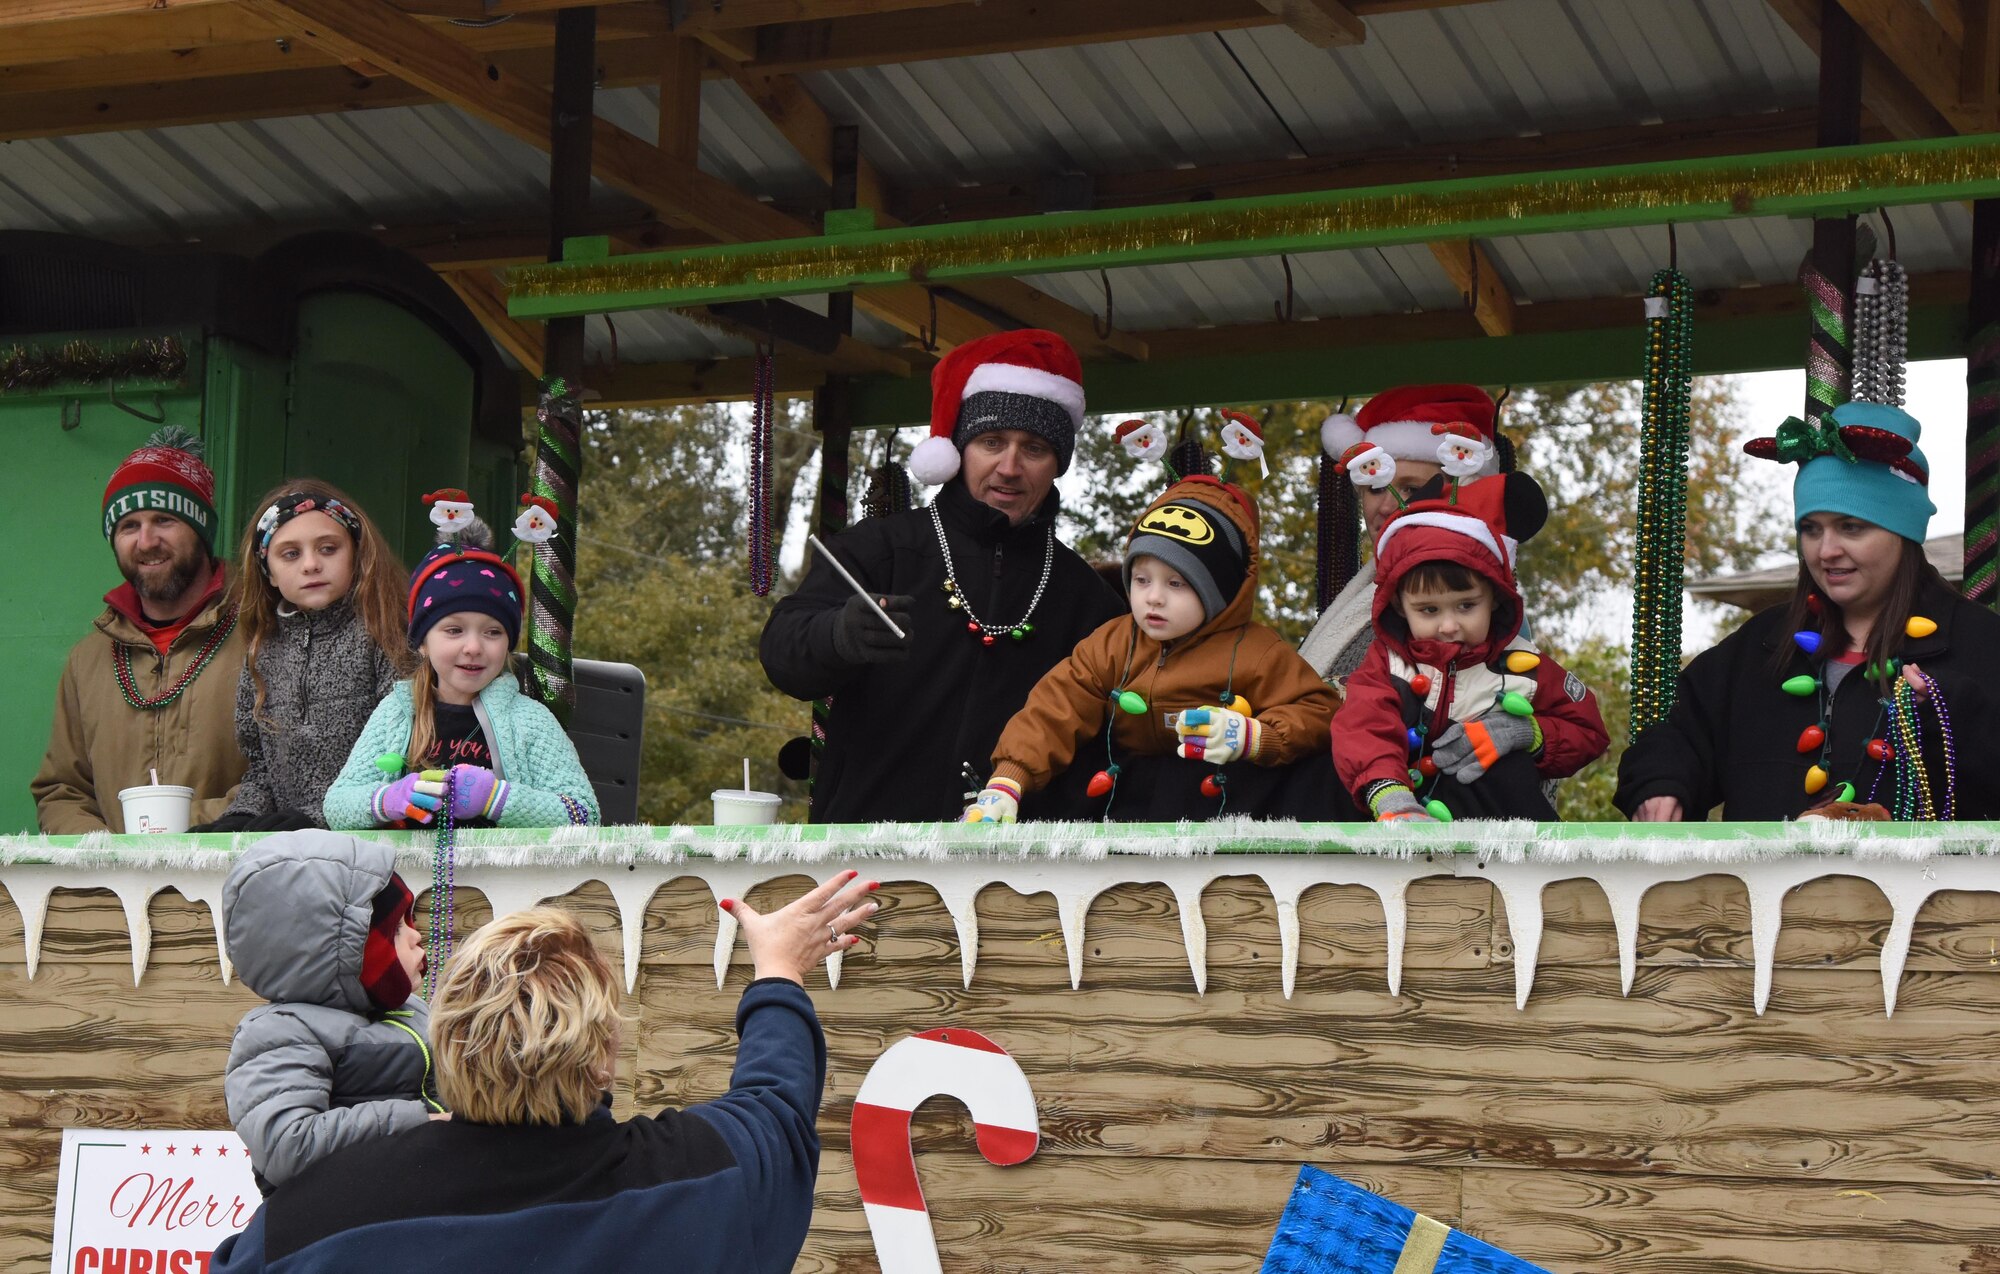 Passengers aboard decorated floats throw toys, candy and beads to families during the Ocean Springs Christmas Parade in Ocean Springs, Mississippi, Dec. 9, 2018. The Keesler Air Force Base Honor Guard and 81st Training Group Airmen participated in the event. (U.S. Air Force photo by Kemberly Groue)